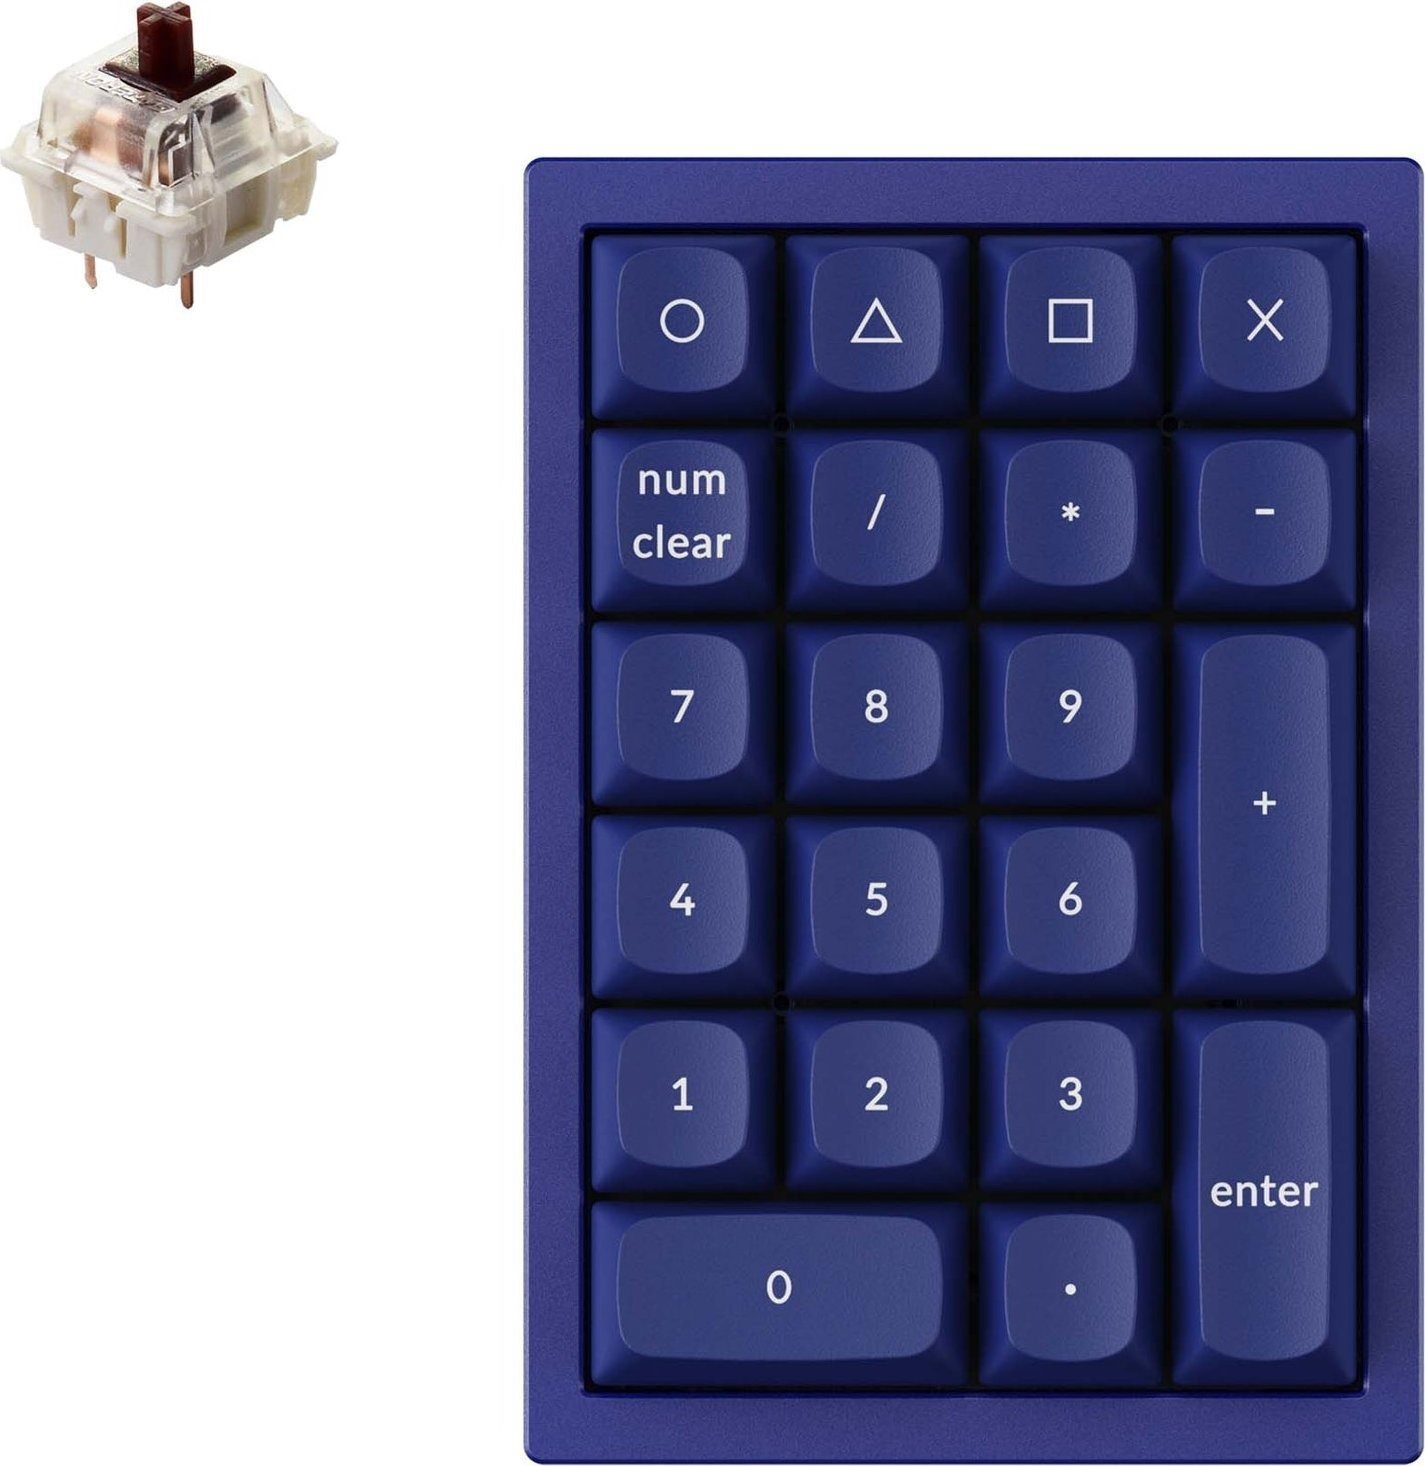 Keychron QMK Q0 Hot-Swappable Number Pad RGB Gateron G Pro Brown Switch Mechanical - Blue Version